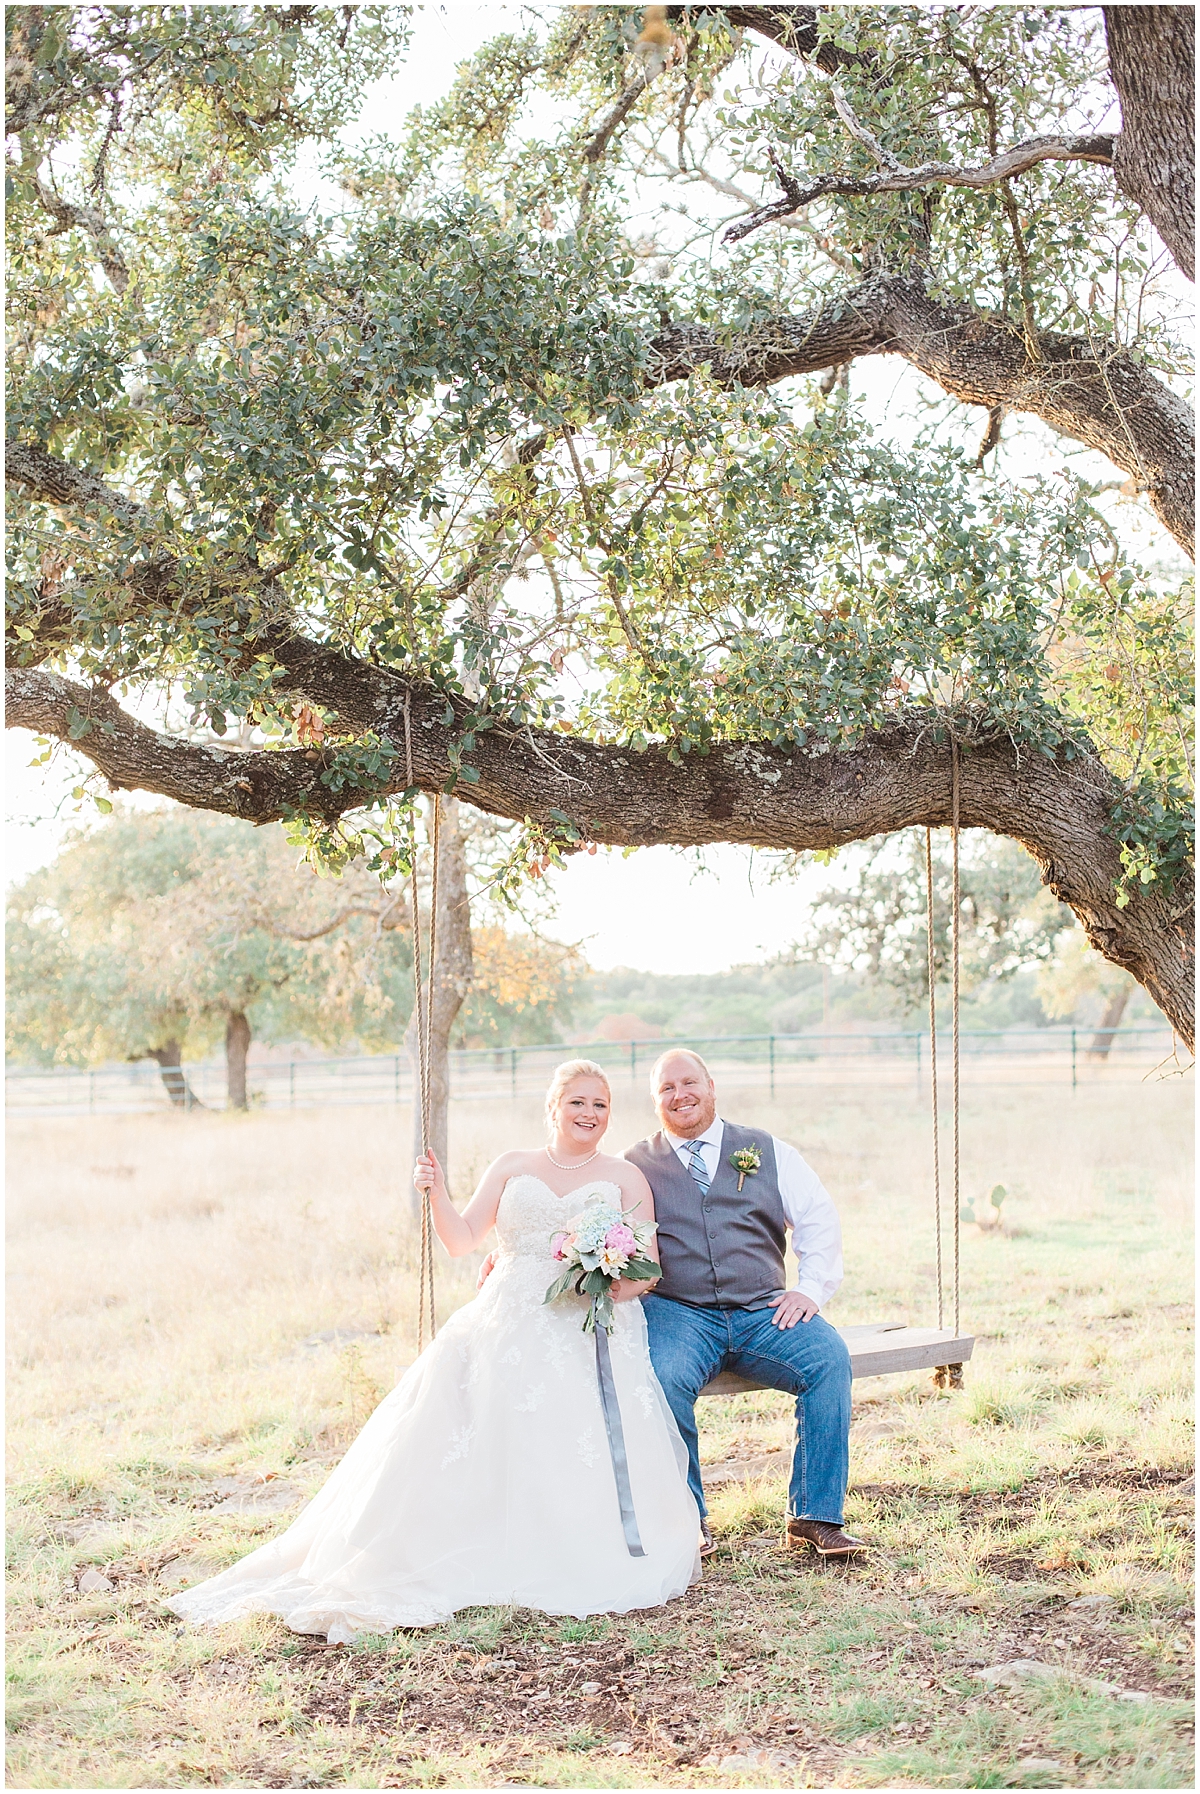 a-slate-blue-and-grey-winter-wedding-at-cw-hill-country-ranch-in-boerne-texas-by-allison-jeffers-wedding-photography_0084